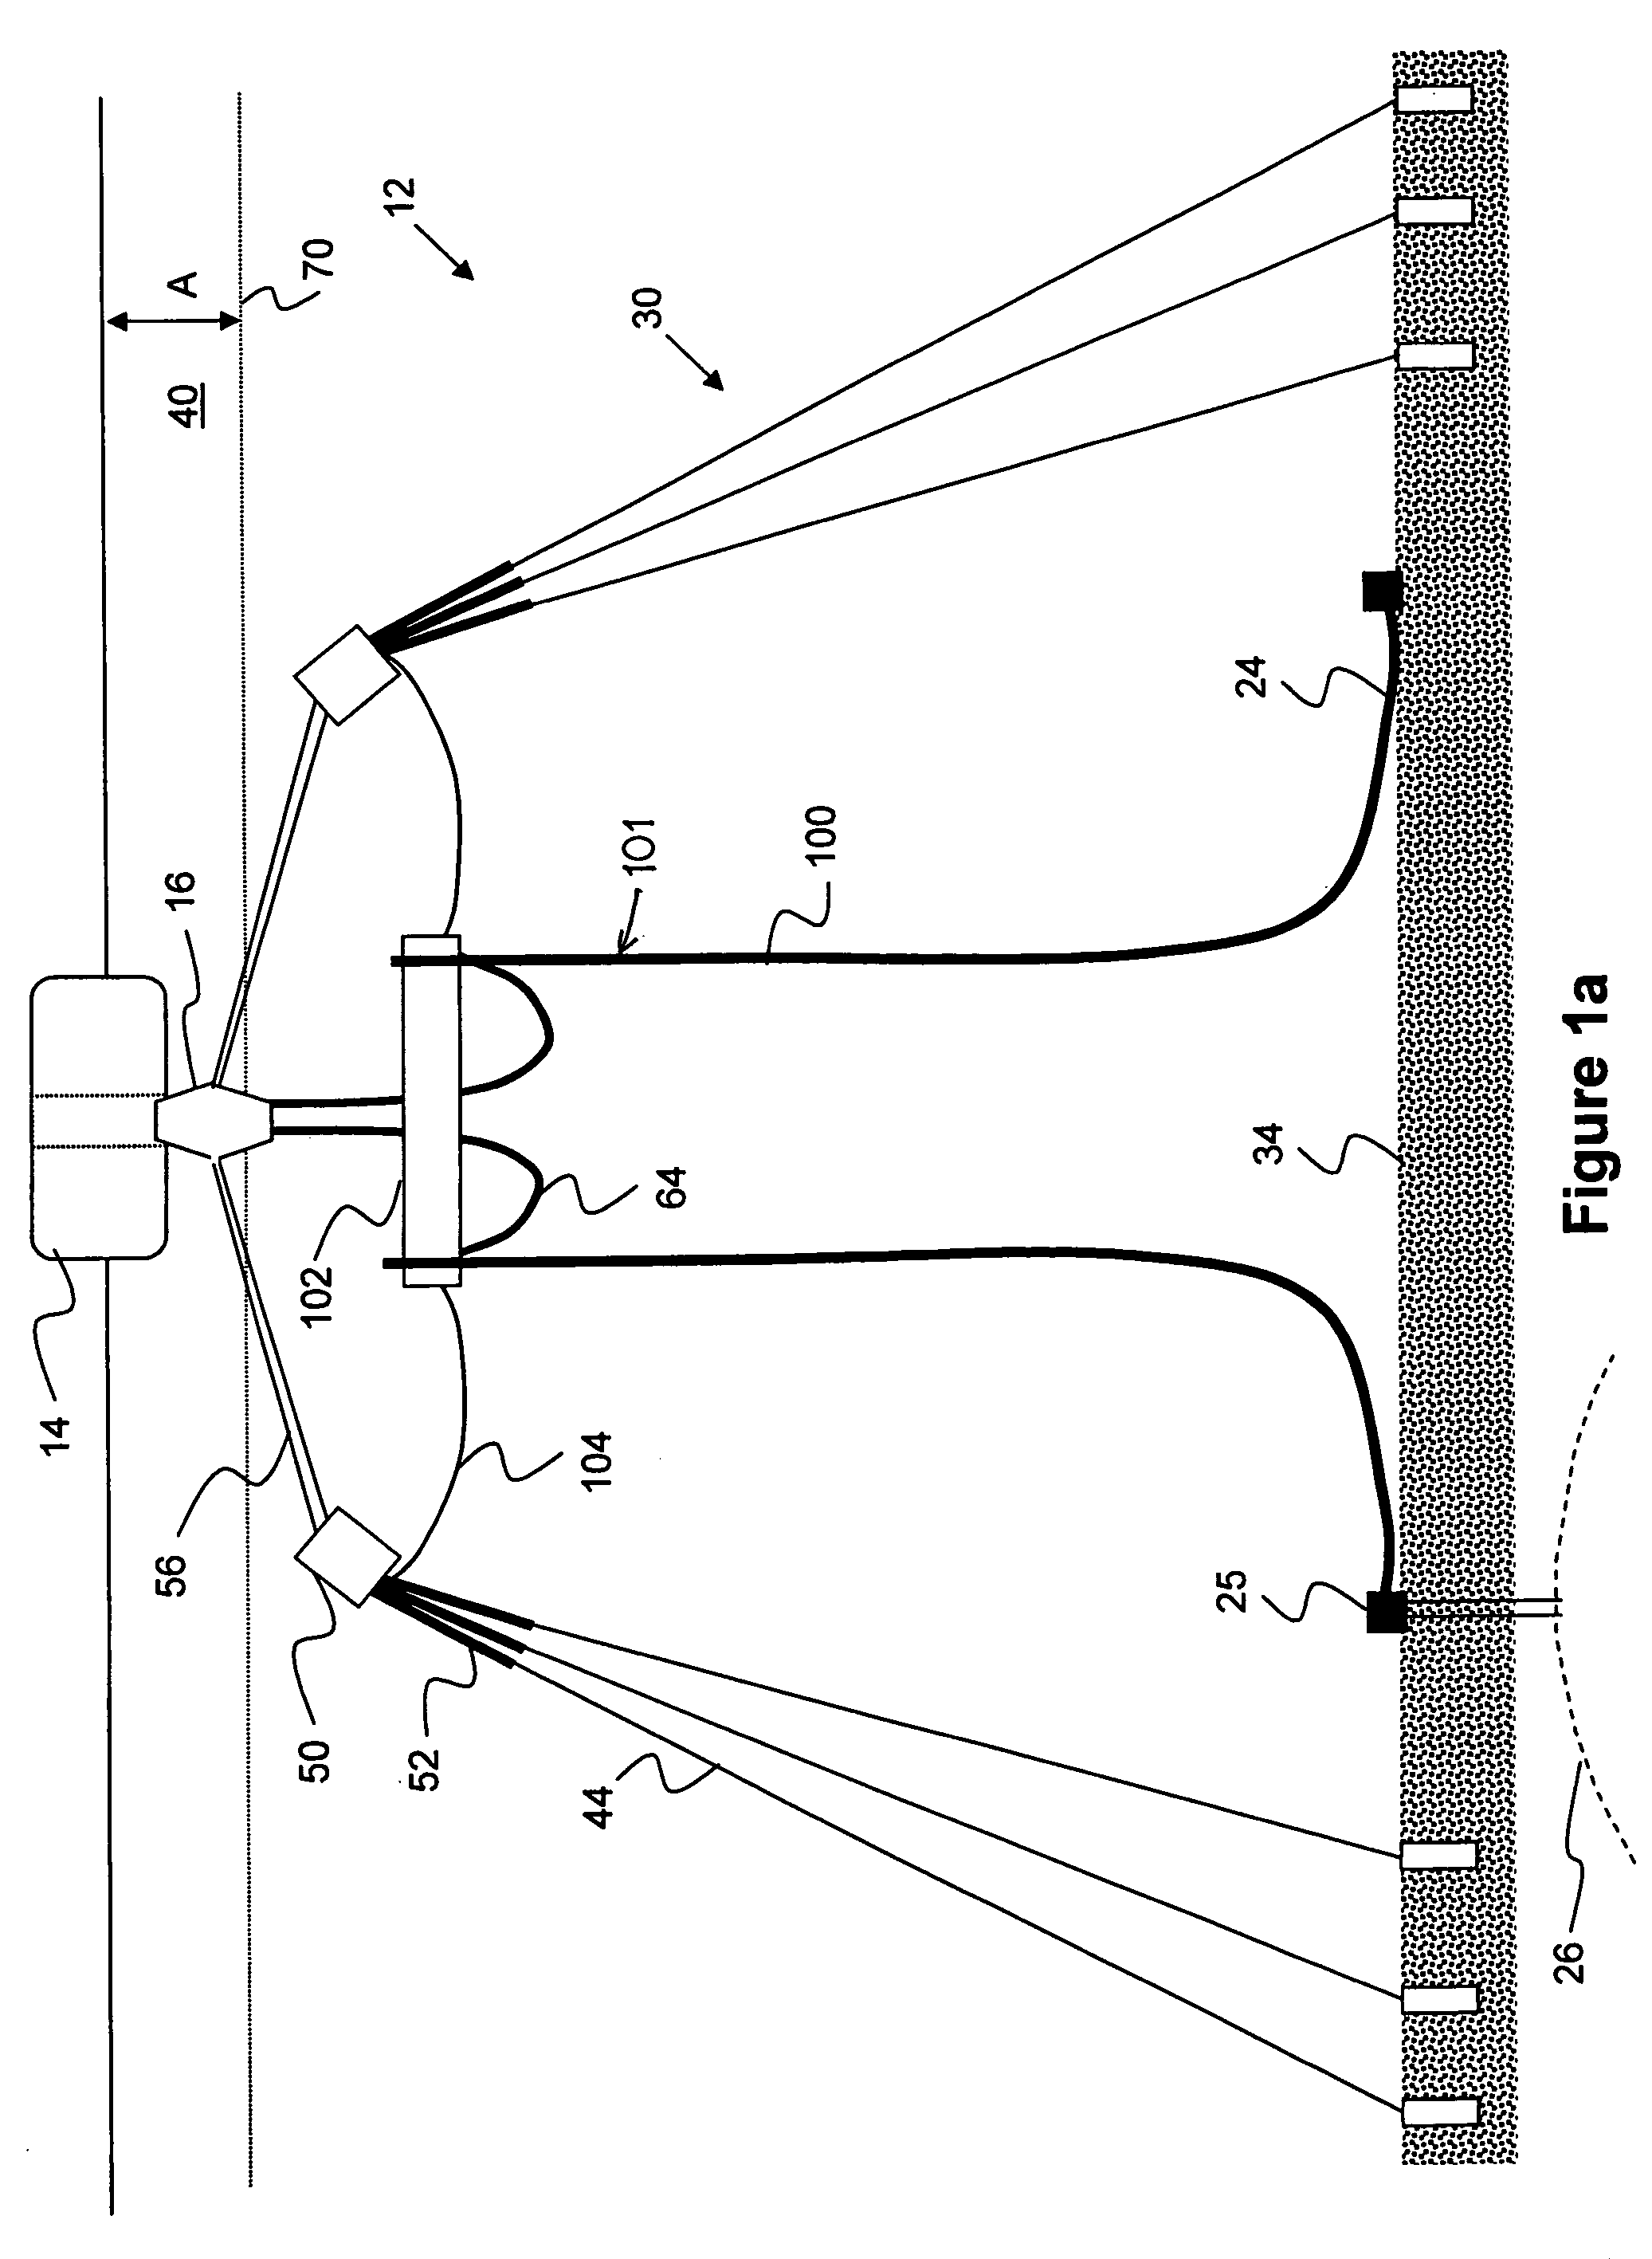 Disconnectable riser-mooring system